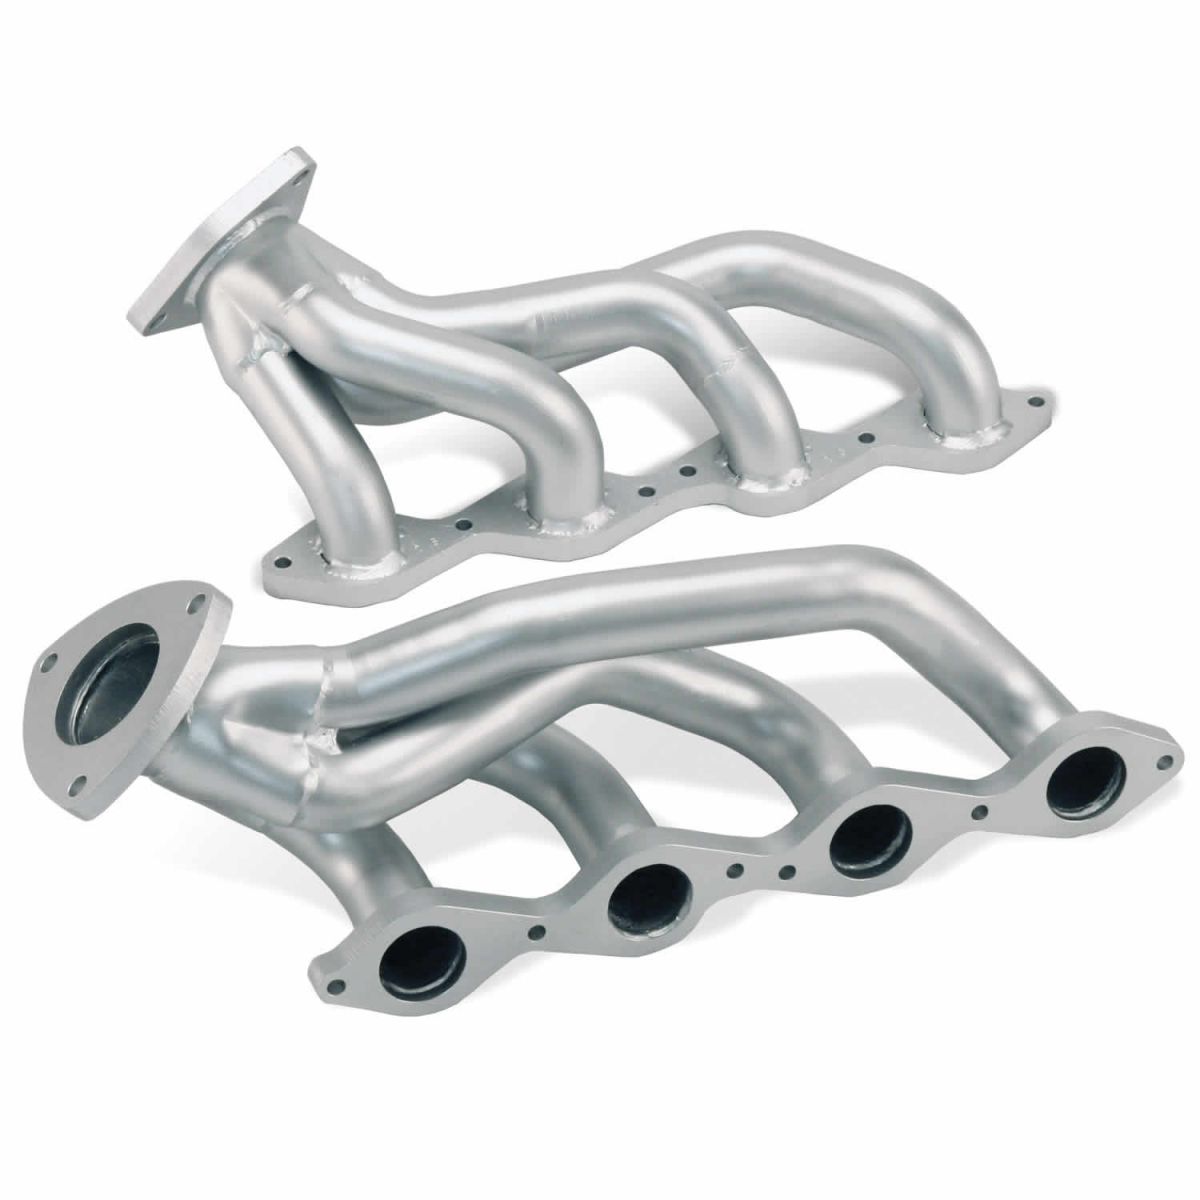 Banks Power - Banks Power Torque Tube Exhaust Header System 02-11 Chevy 4.8-5.3L Non-A/I (no air injection)